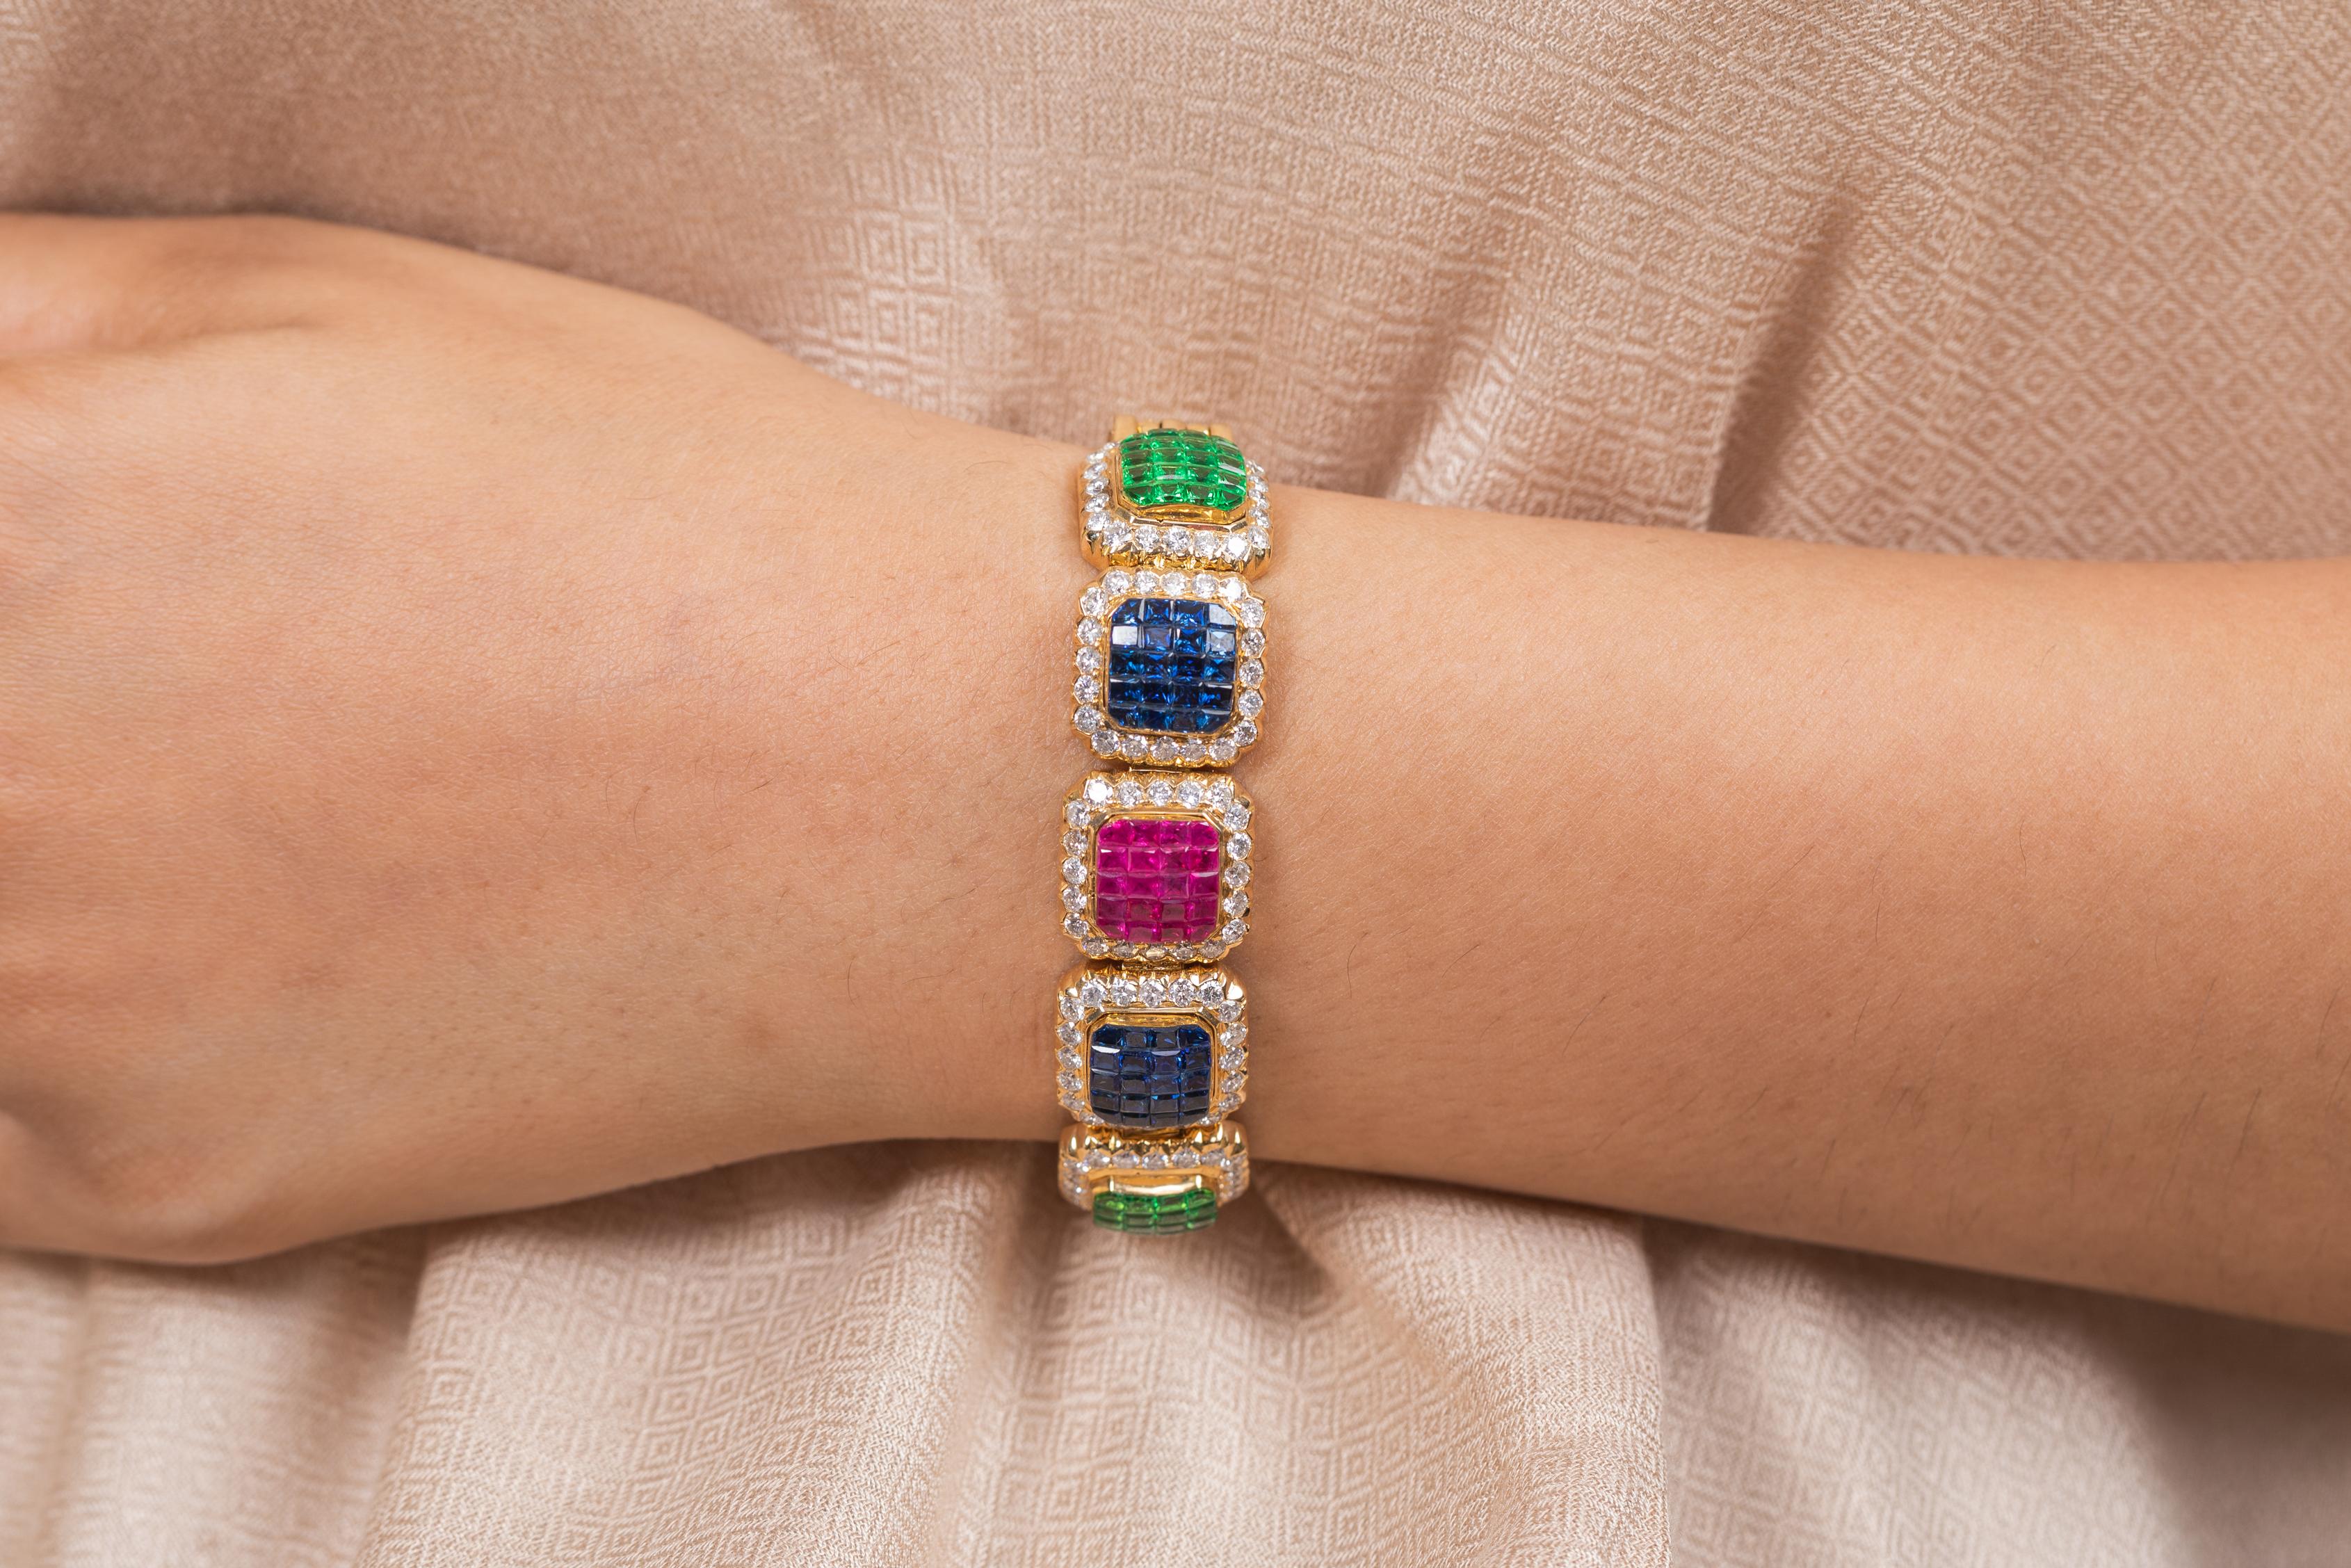 The wearing of charms may have begun as a form of amulet or talisman to ward off evil spirits or bad luck.
This multi gemstone bracelet has a square cut gemstone and diamonds in 18K Gold. A perfect piece of jewelry to adorn your jewelry